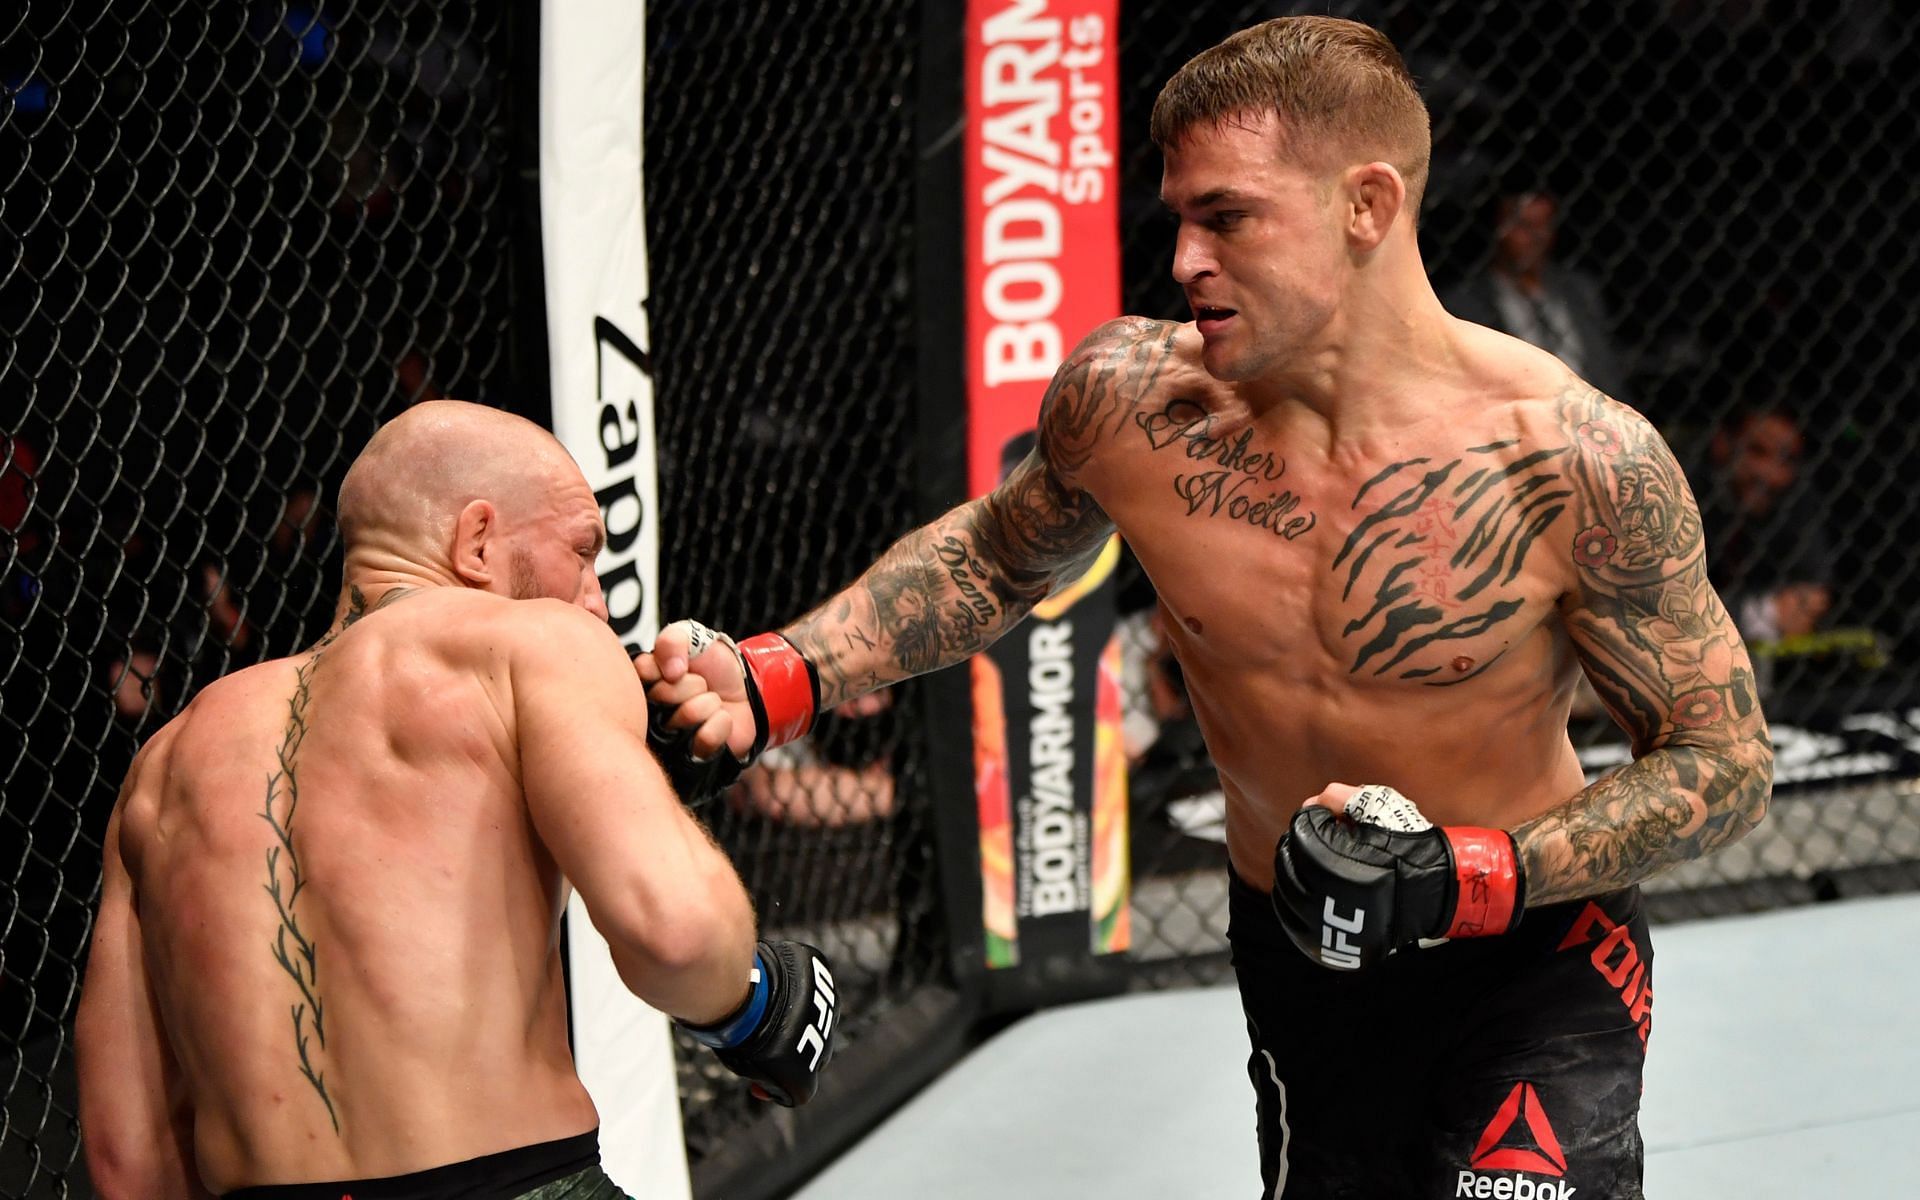 Conor McGregor (Left) getting out-struck by Dustin Poirier (Right) in their rematch